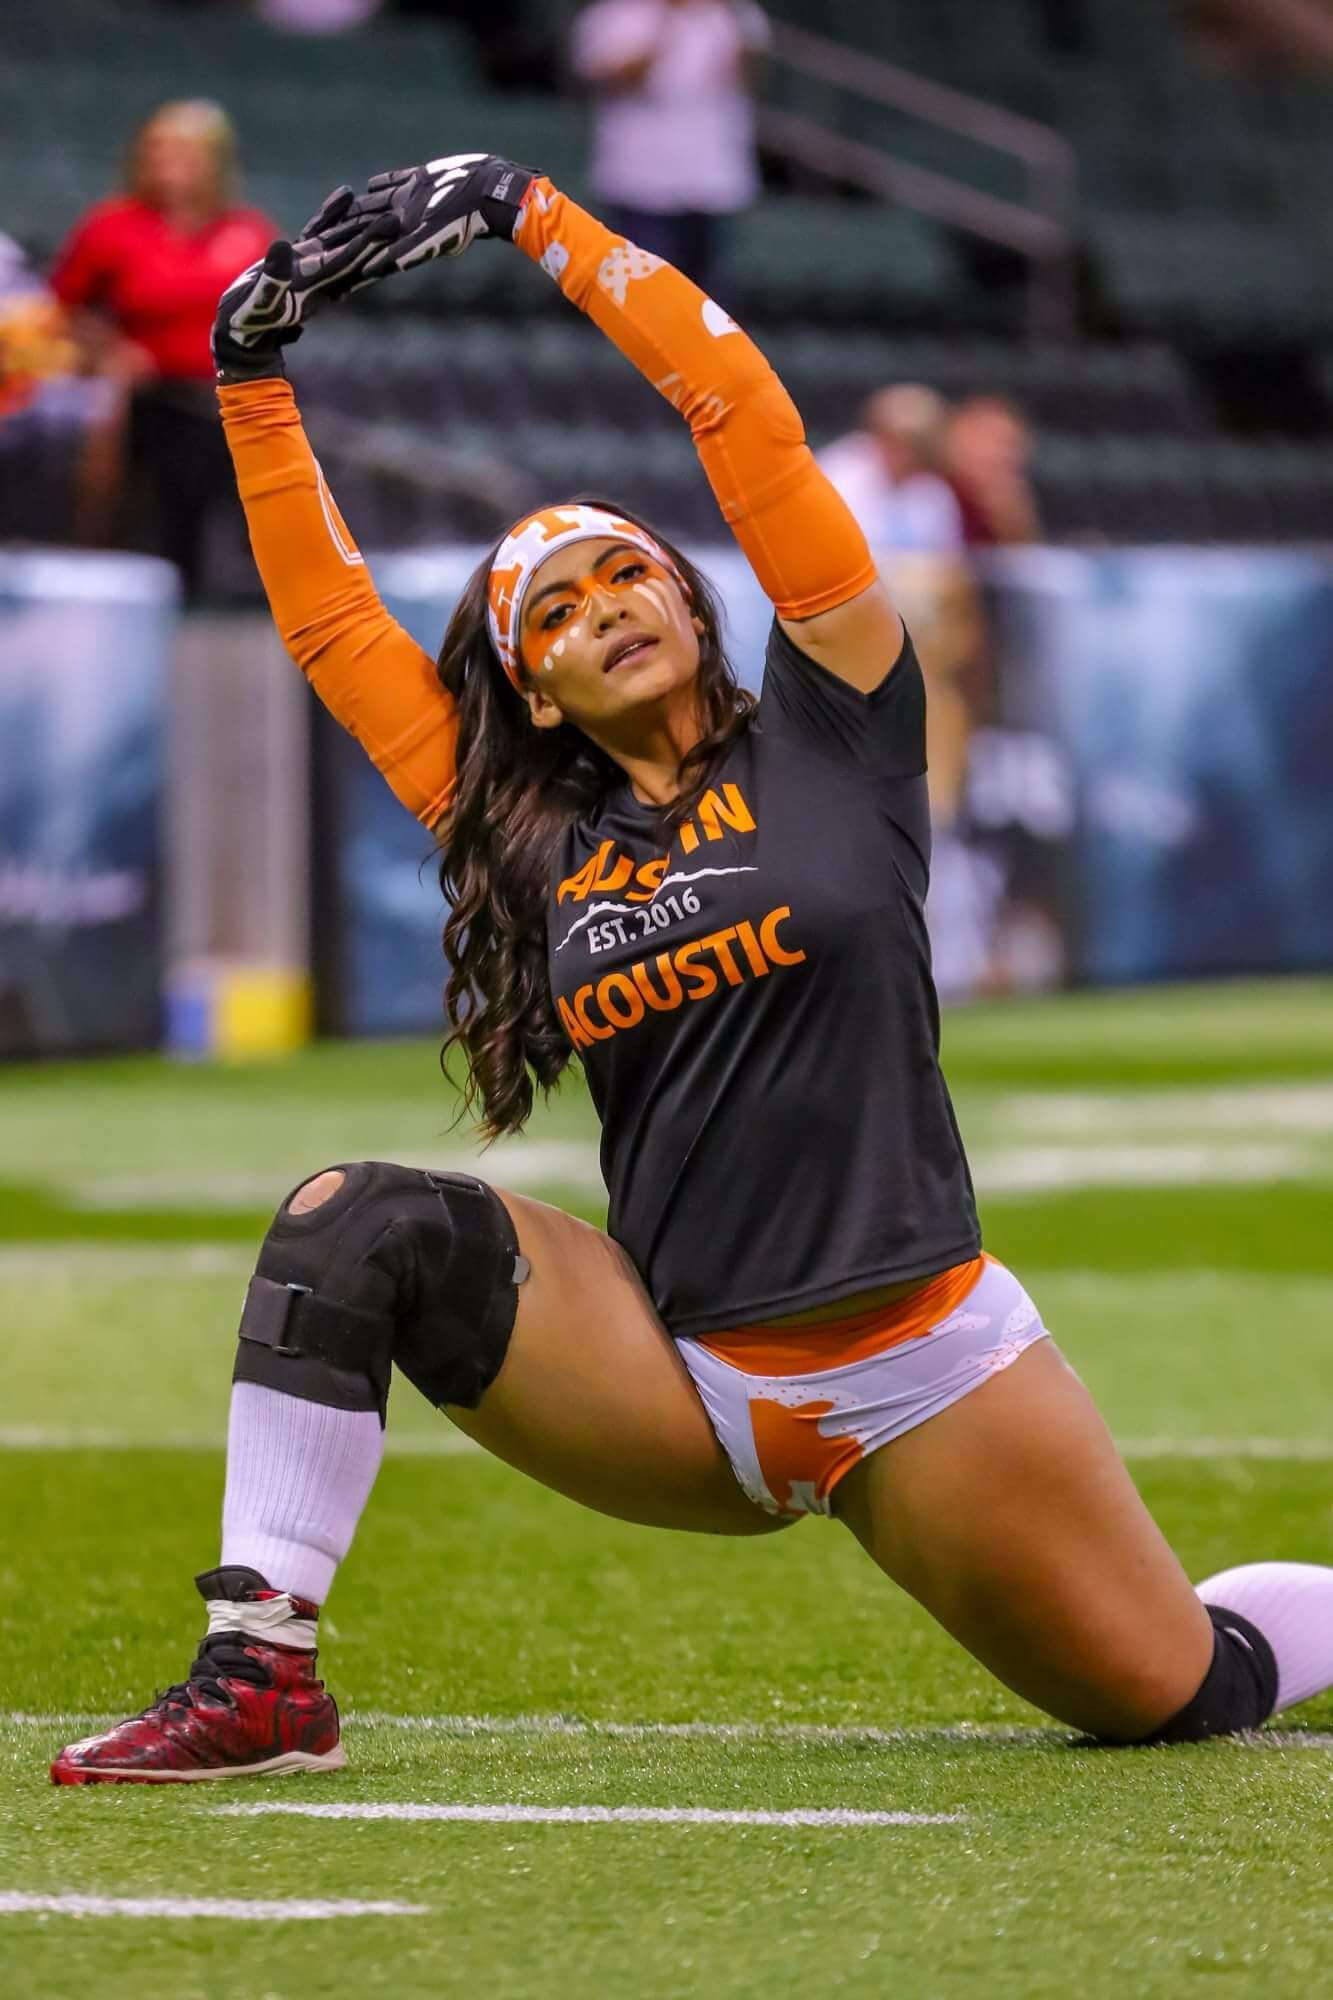 The Legends Football League Beautiful Women And Football, Need We Say Anymore! 85